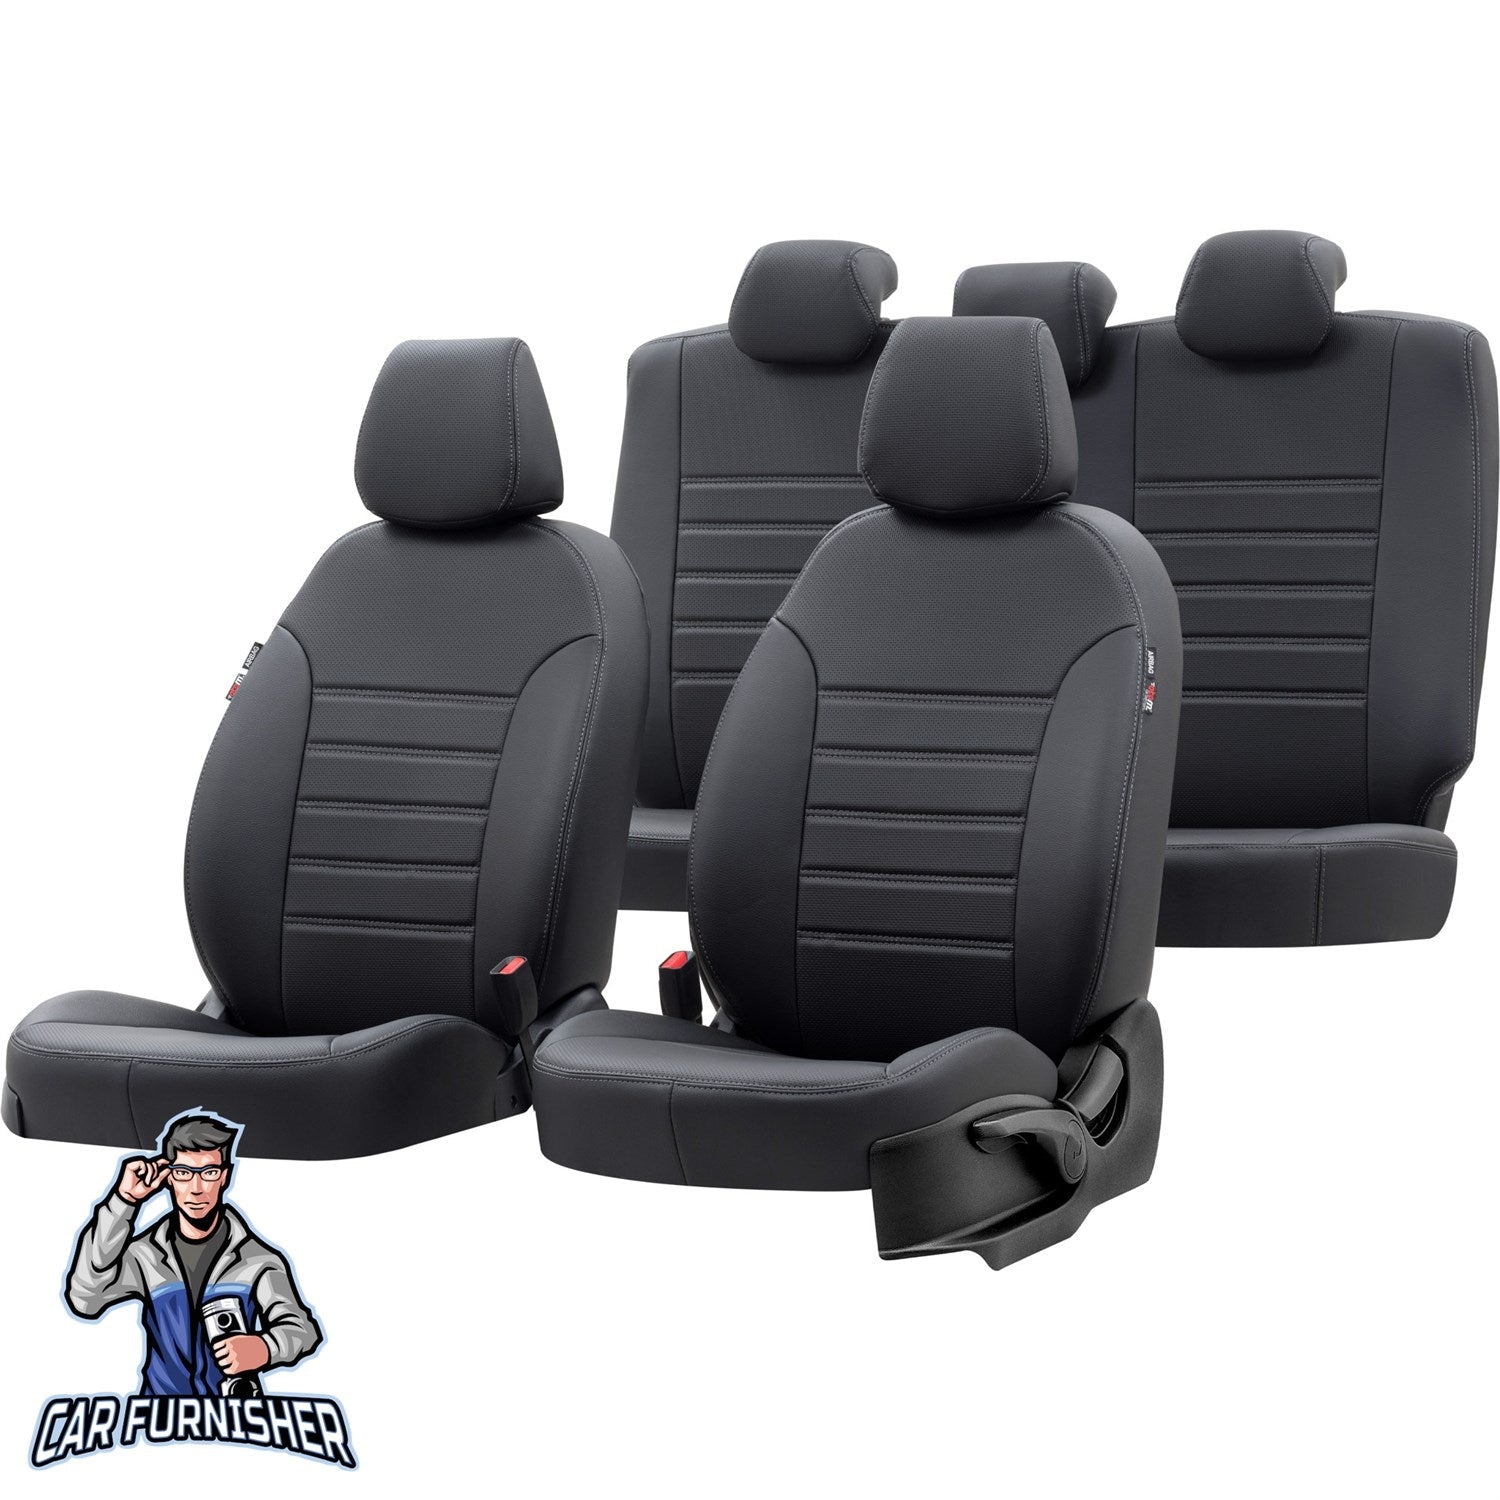 Toyota Prius Seat Cover New York Leather Design Black Leather